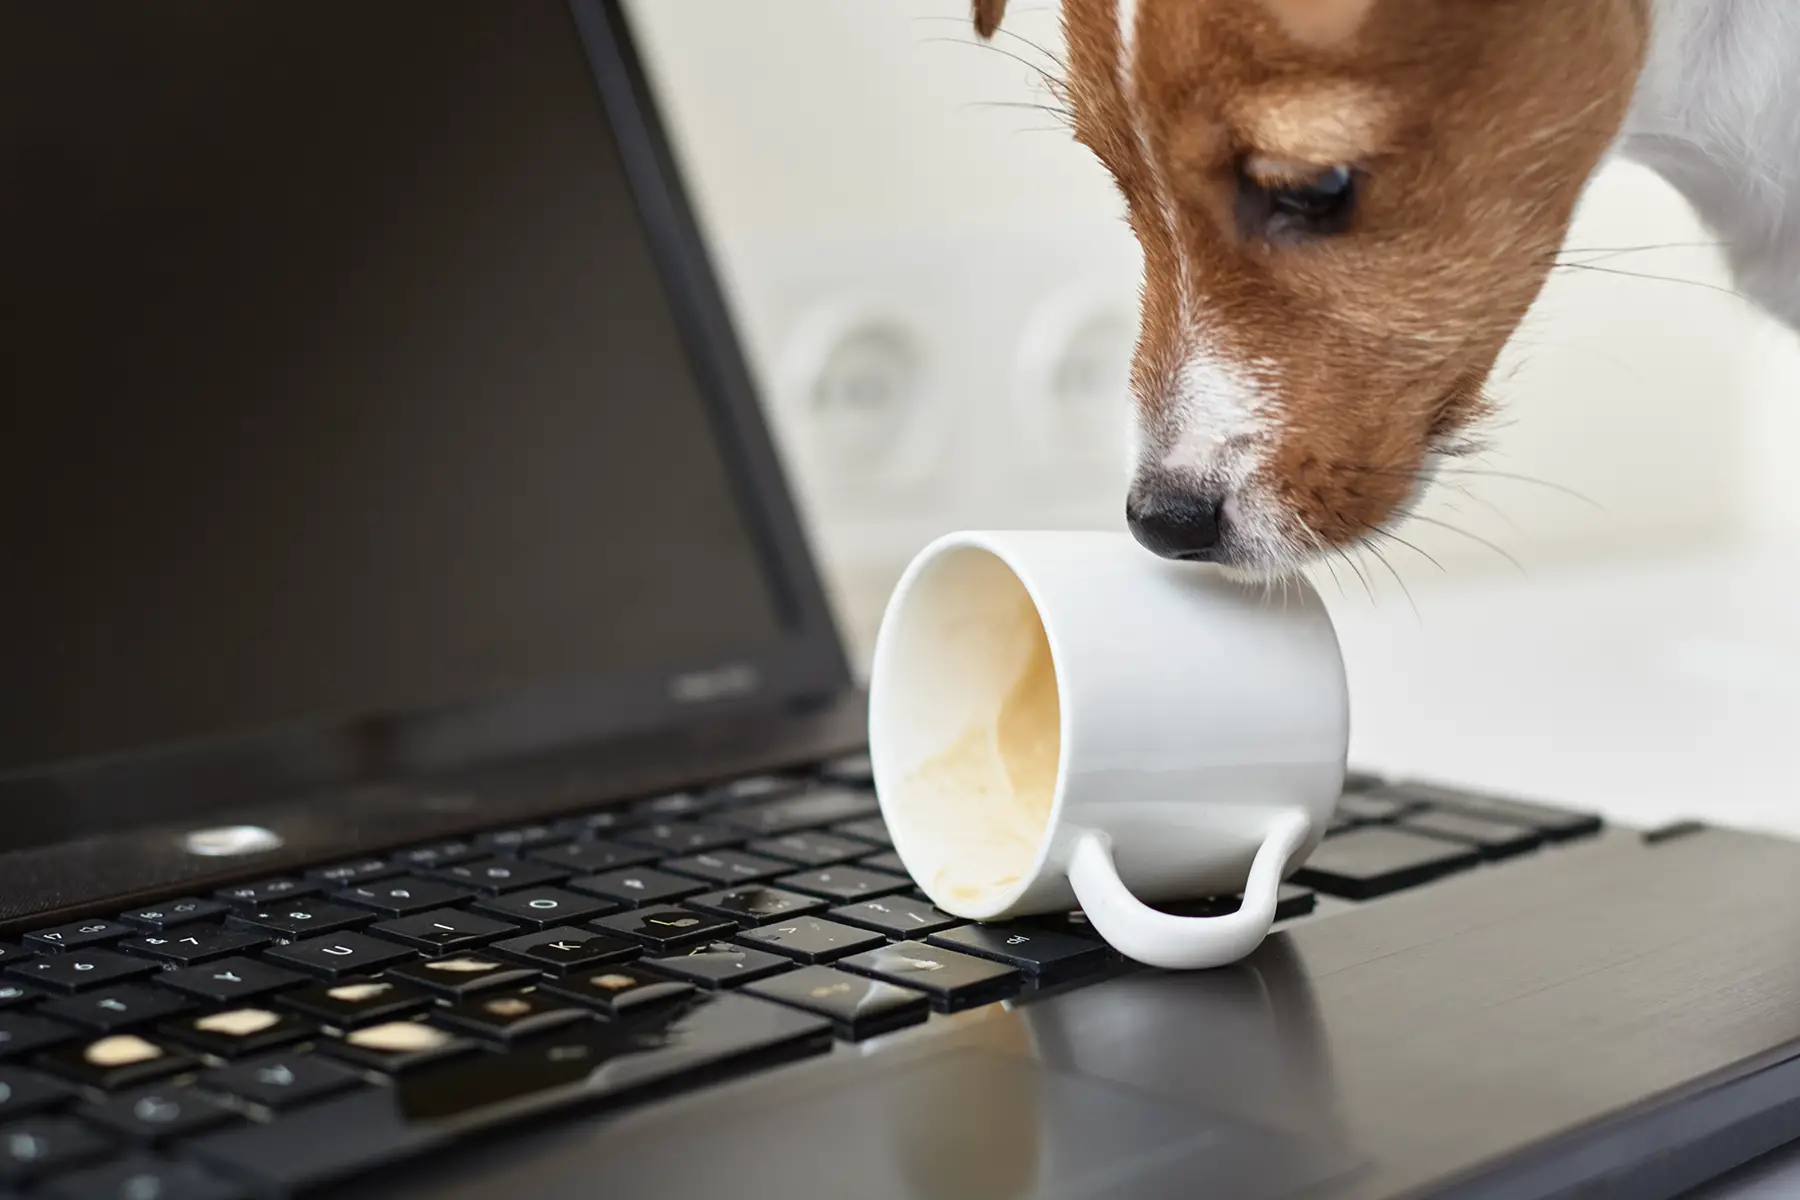 A dog spills coffee on a laptop